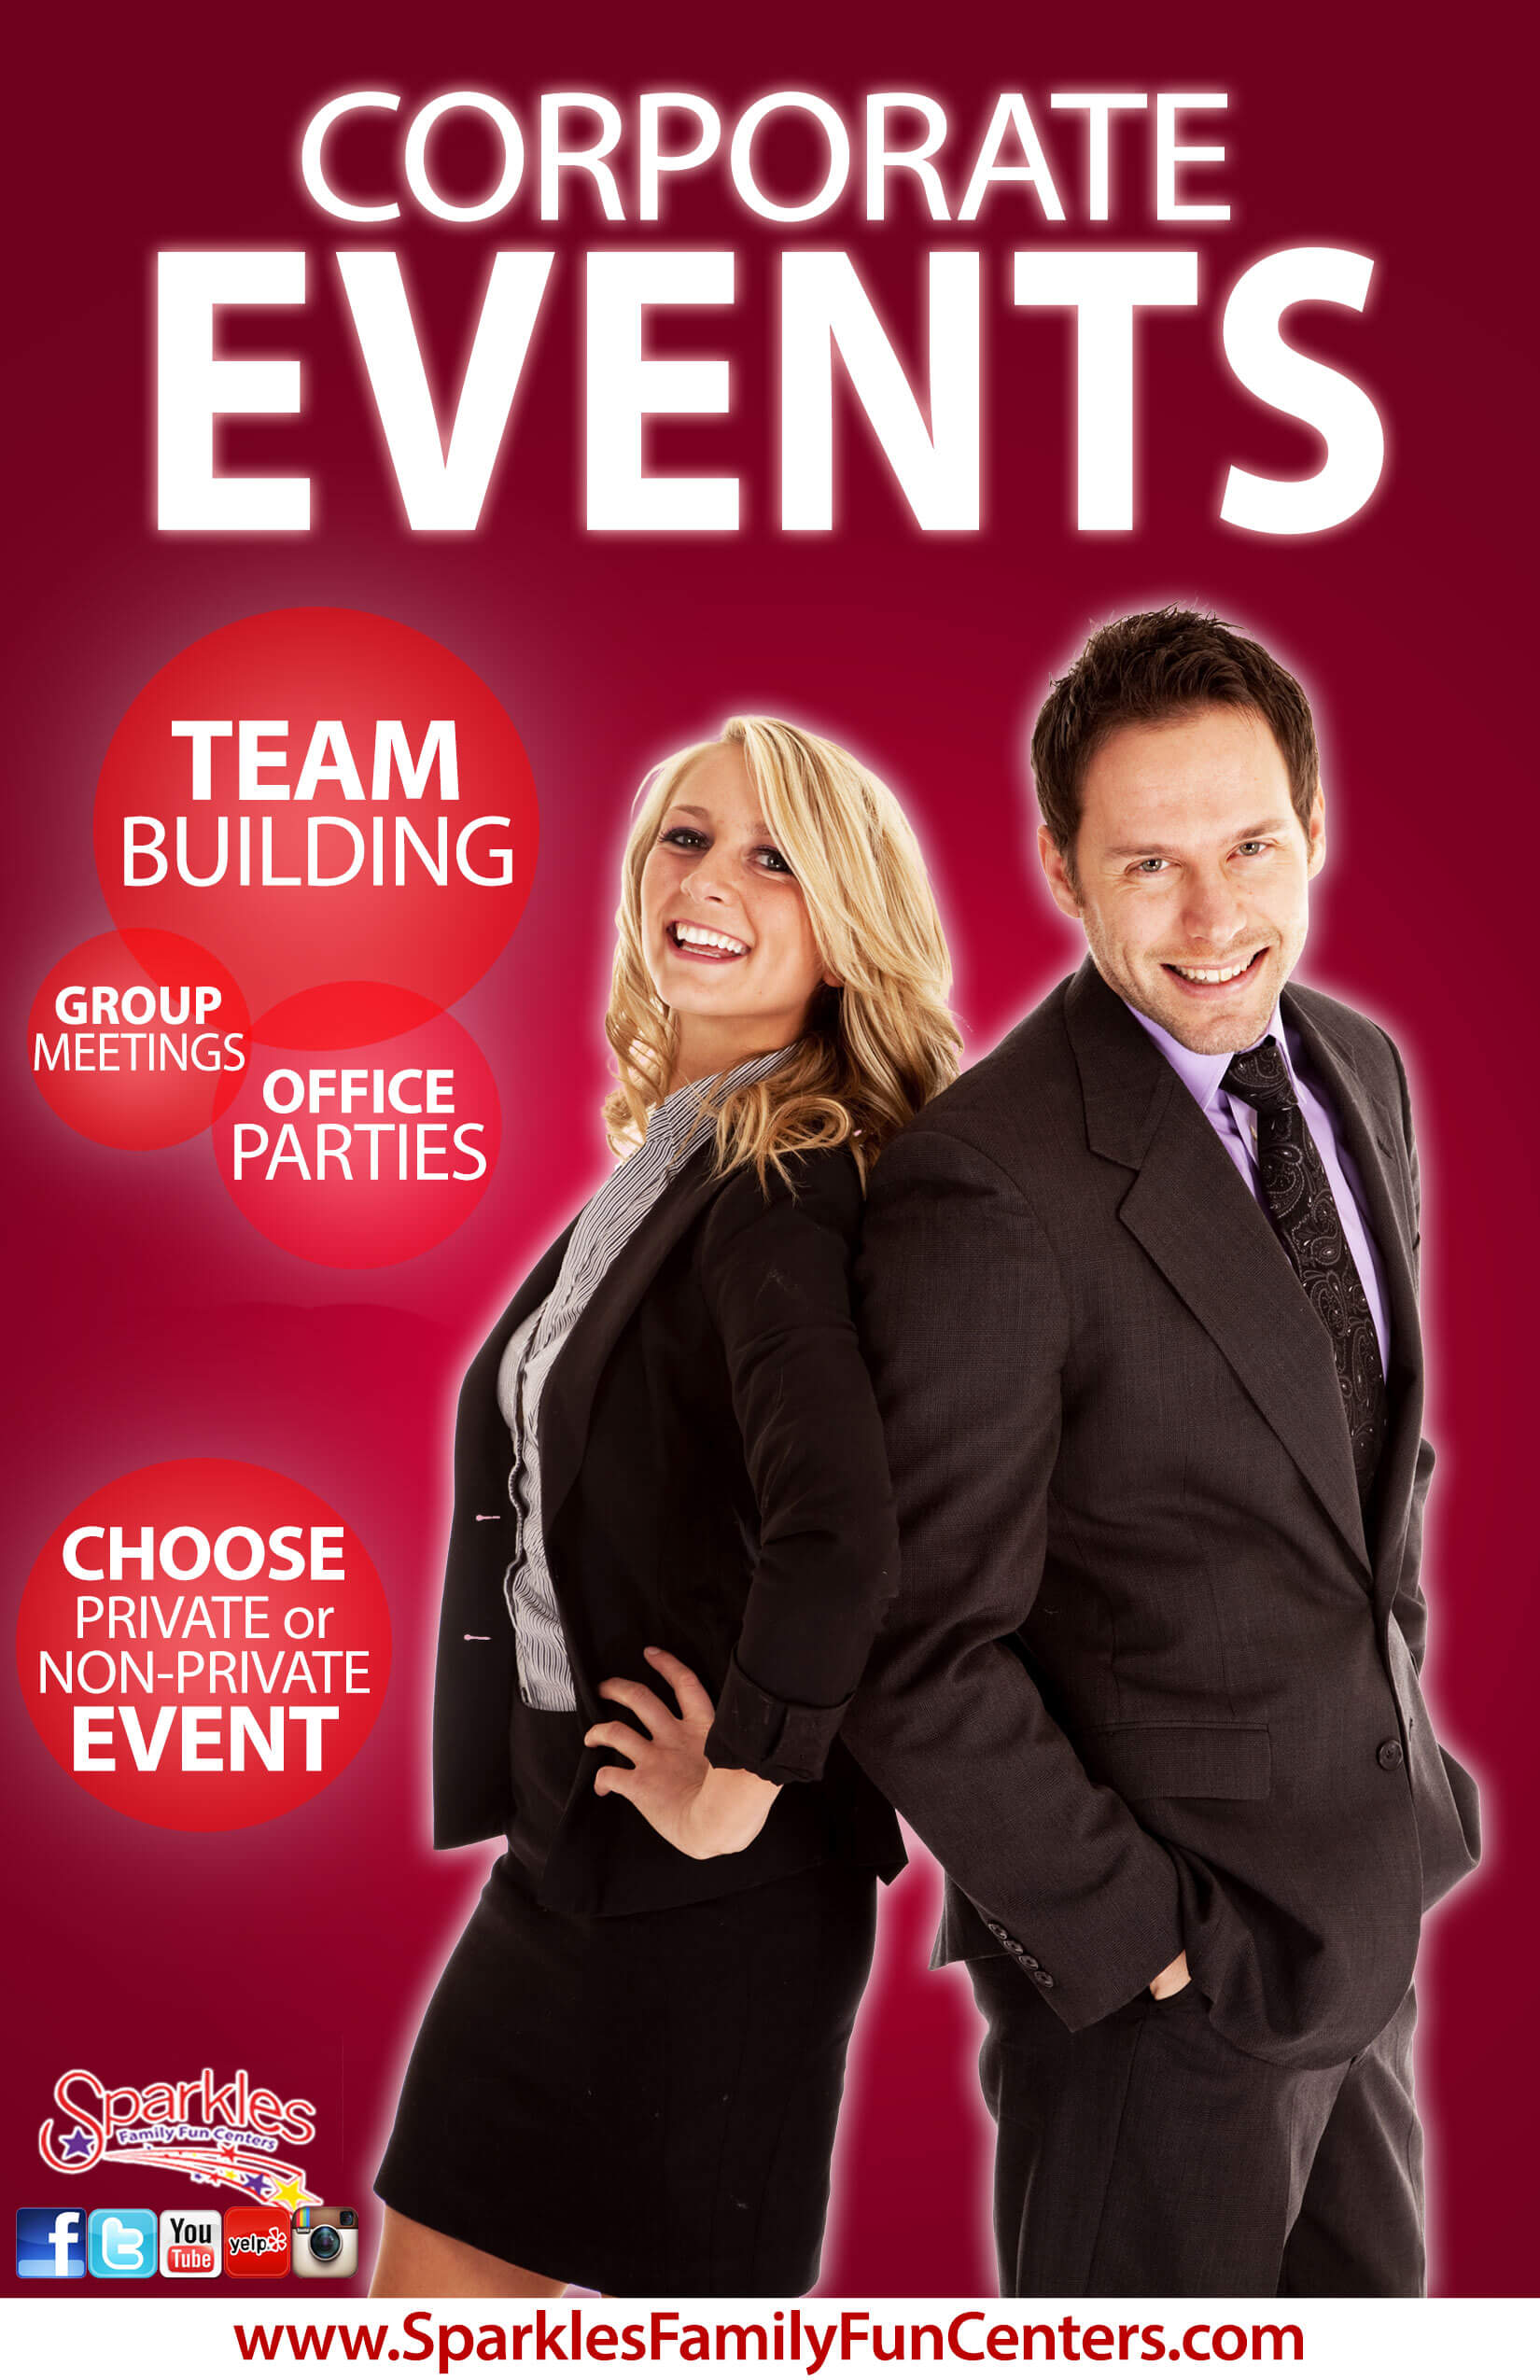 Corporate events